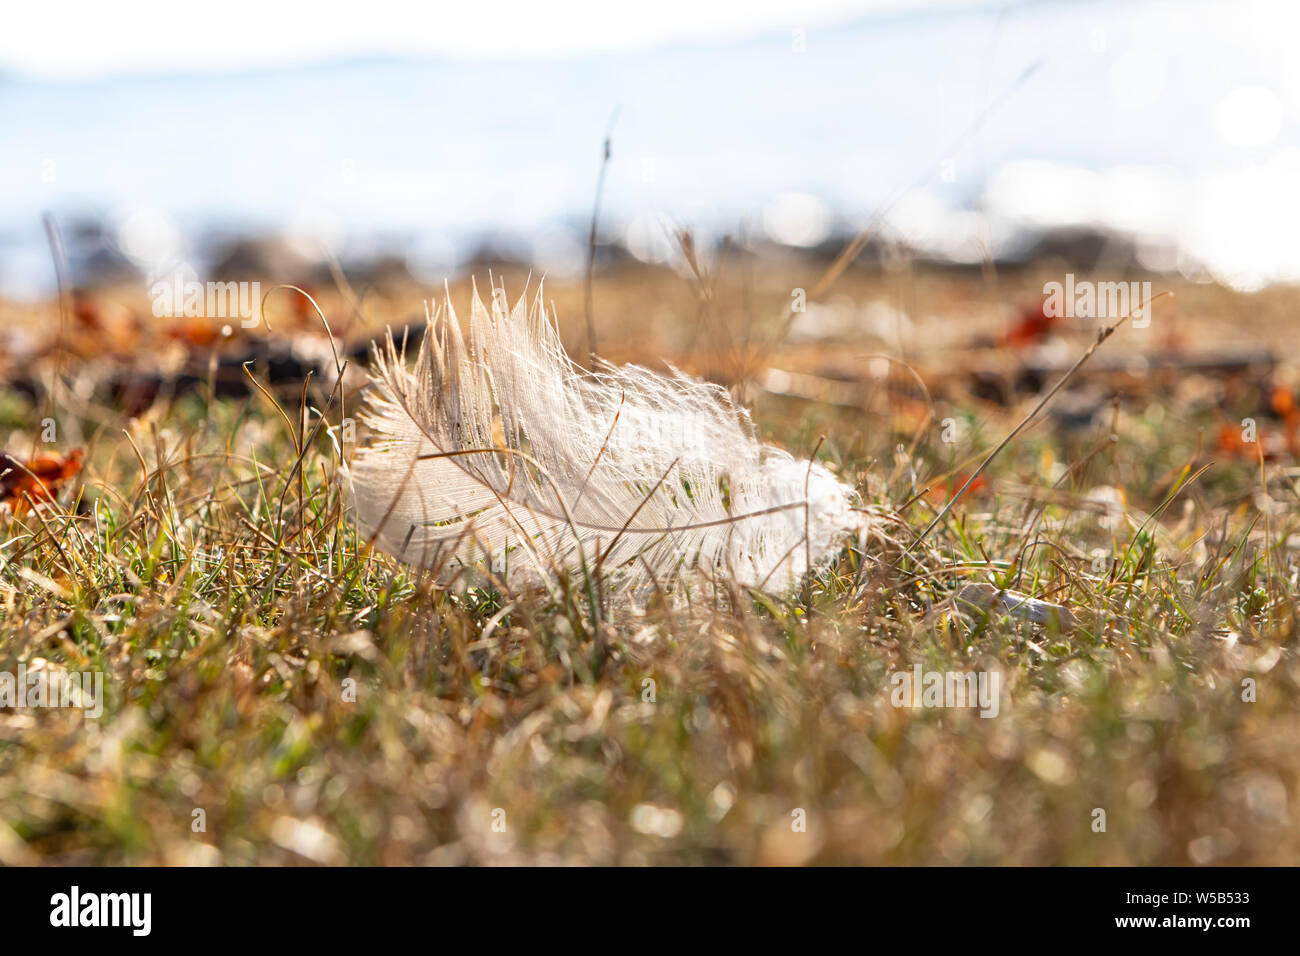 close up of a single  white bird feather on tundra grass next to a beach with a blurred background Stock Photo